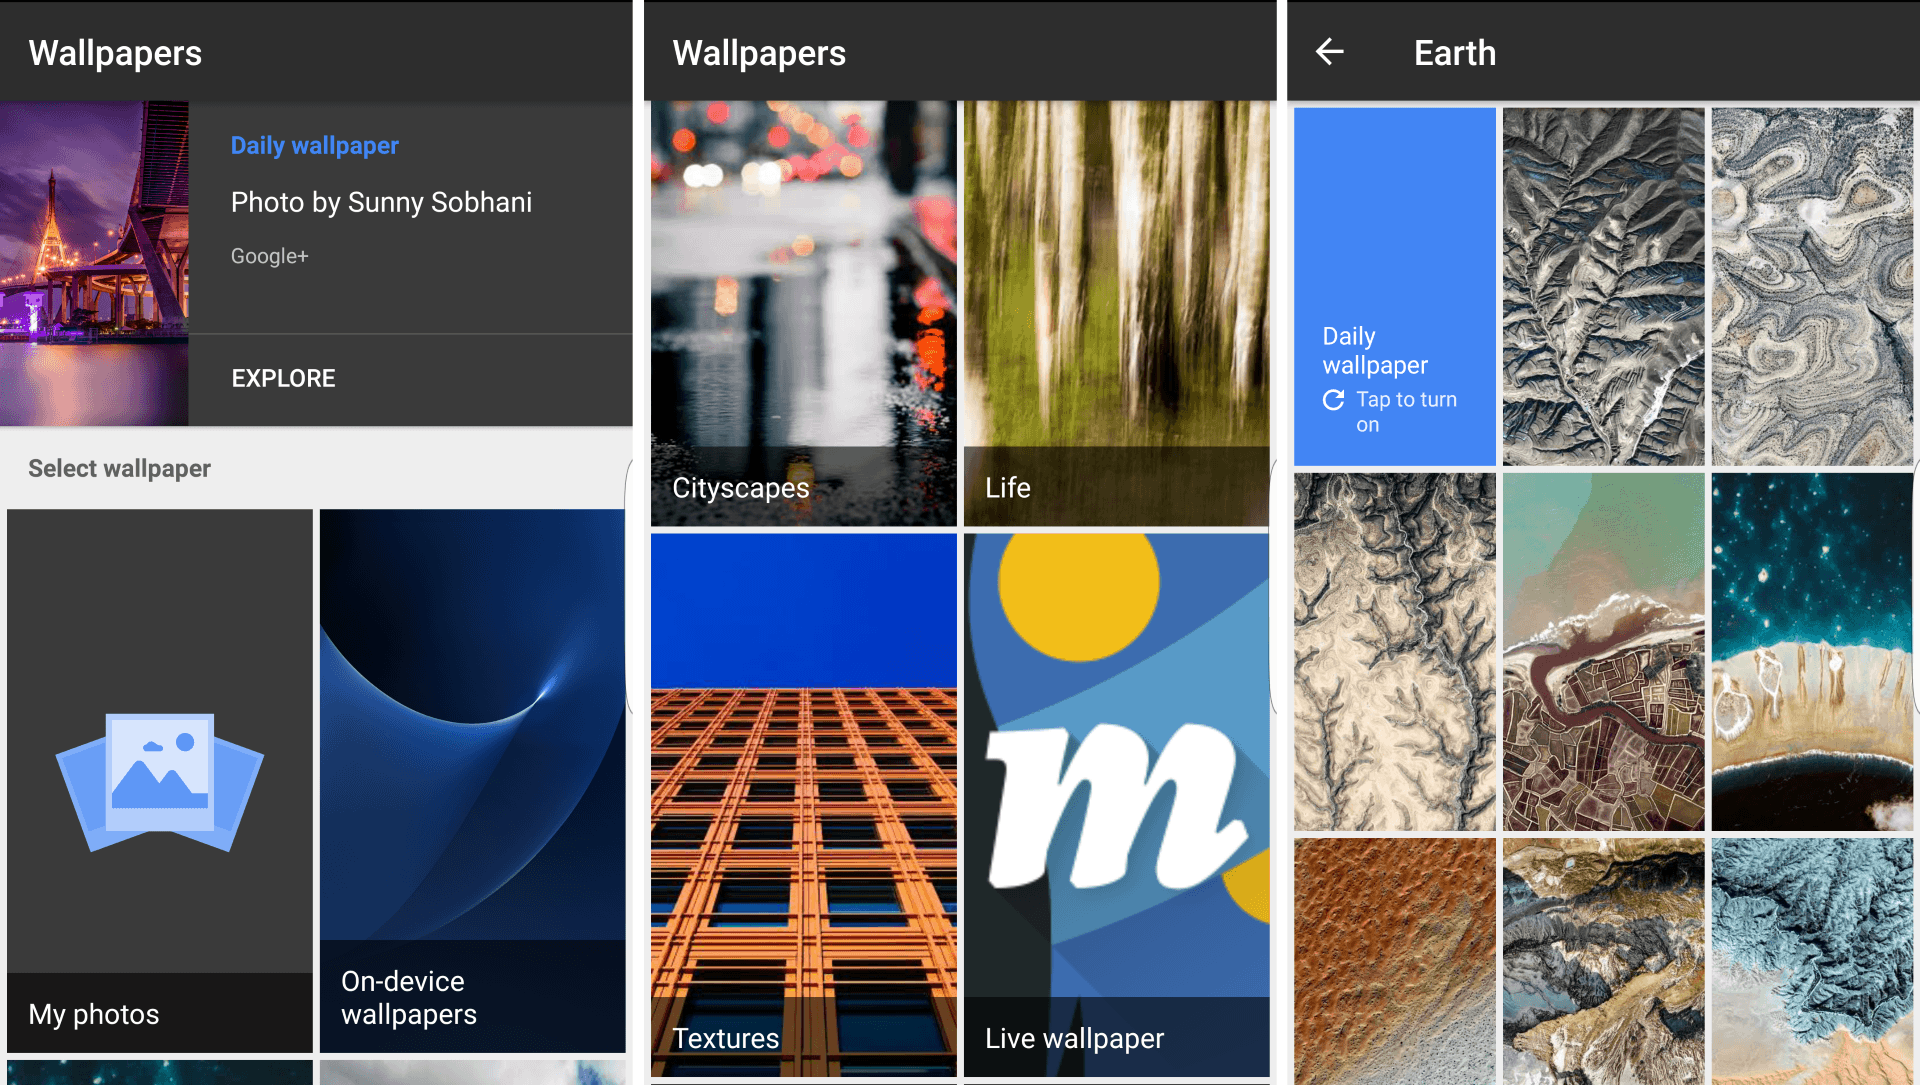 wallpaper apps for Android